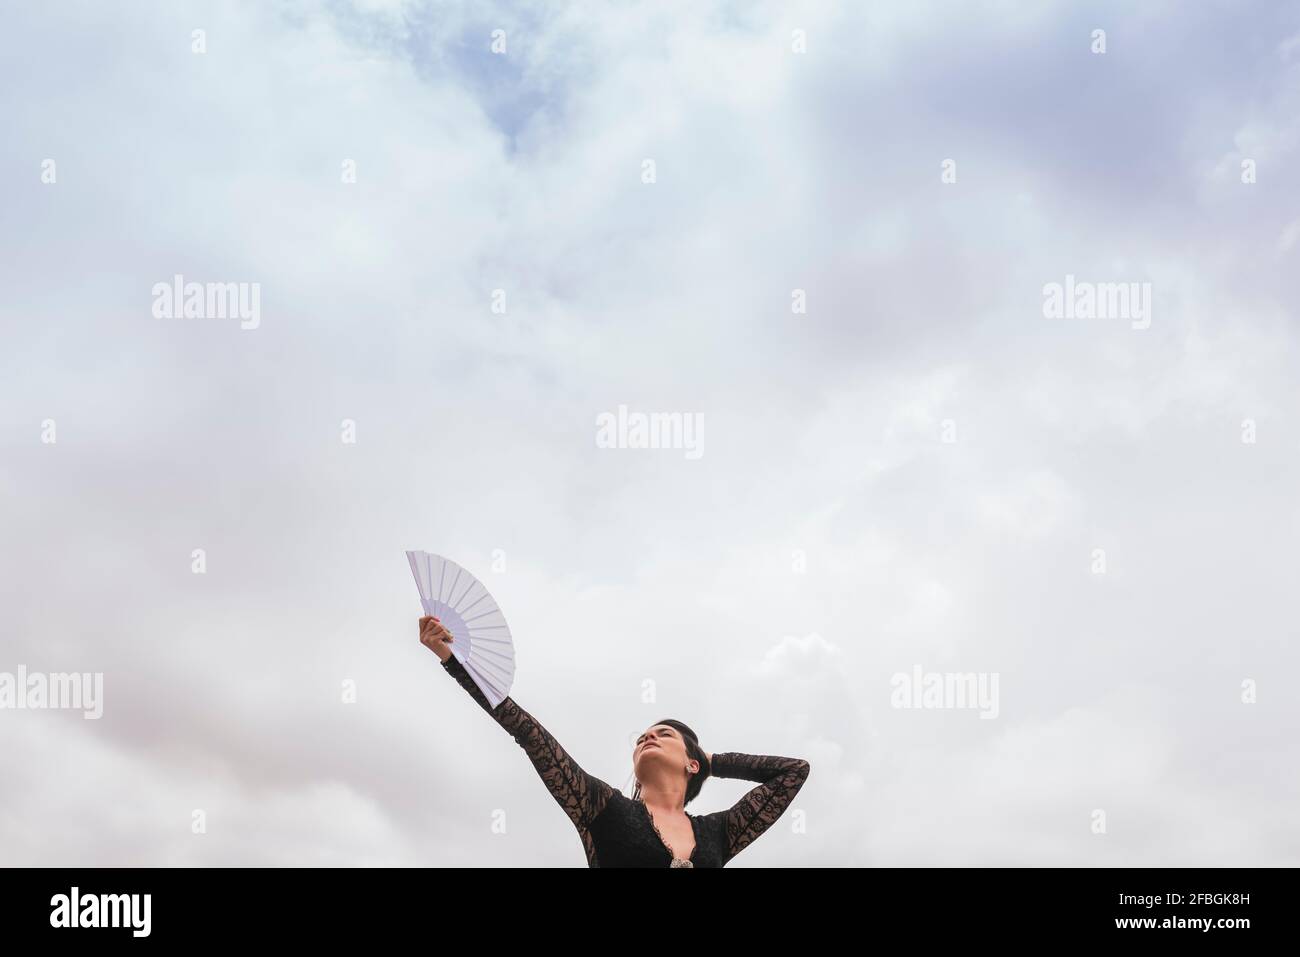 Female dancer with hand fan performing flamenco under cloudy sky Stock Photo